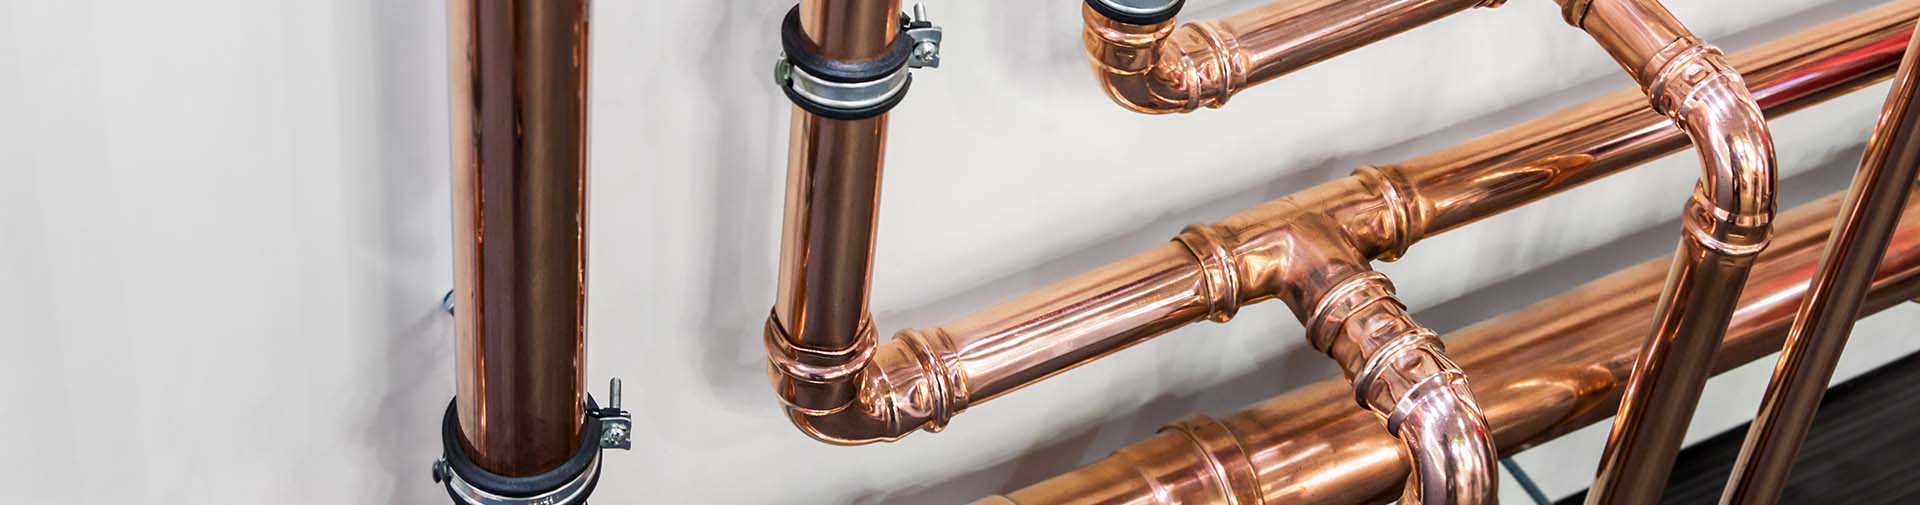 North Richland Hills Plumber, Plumbing Company and Plumbing Services